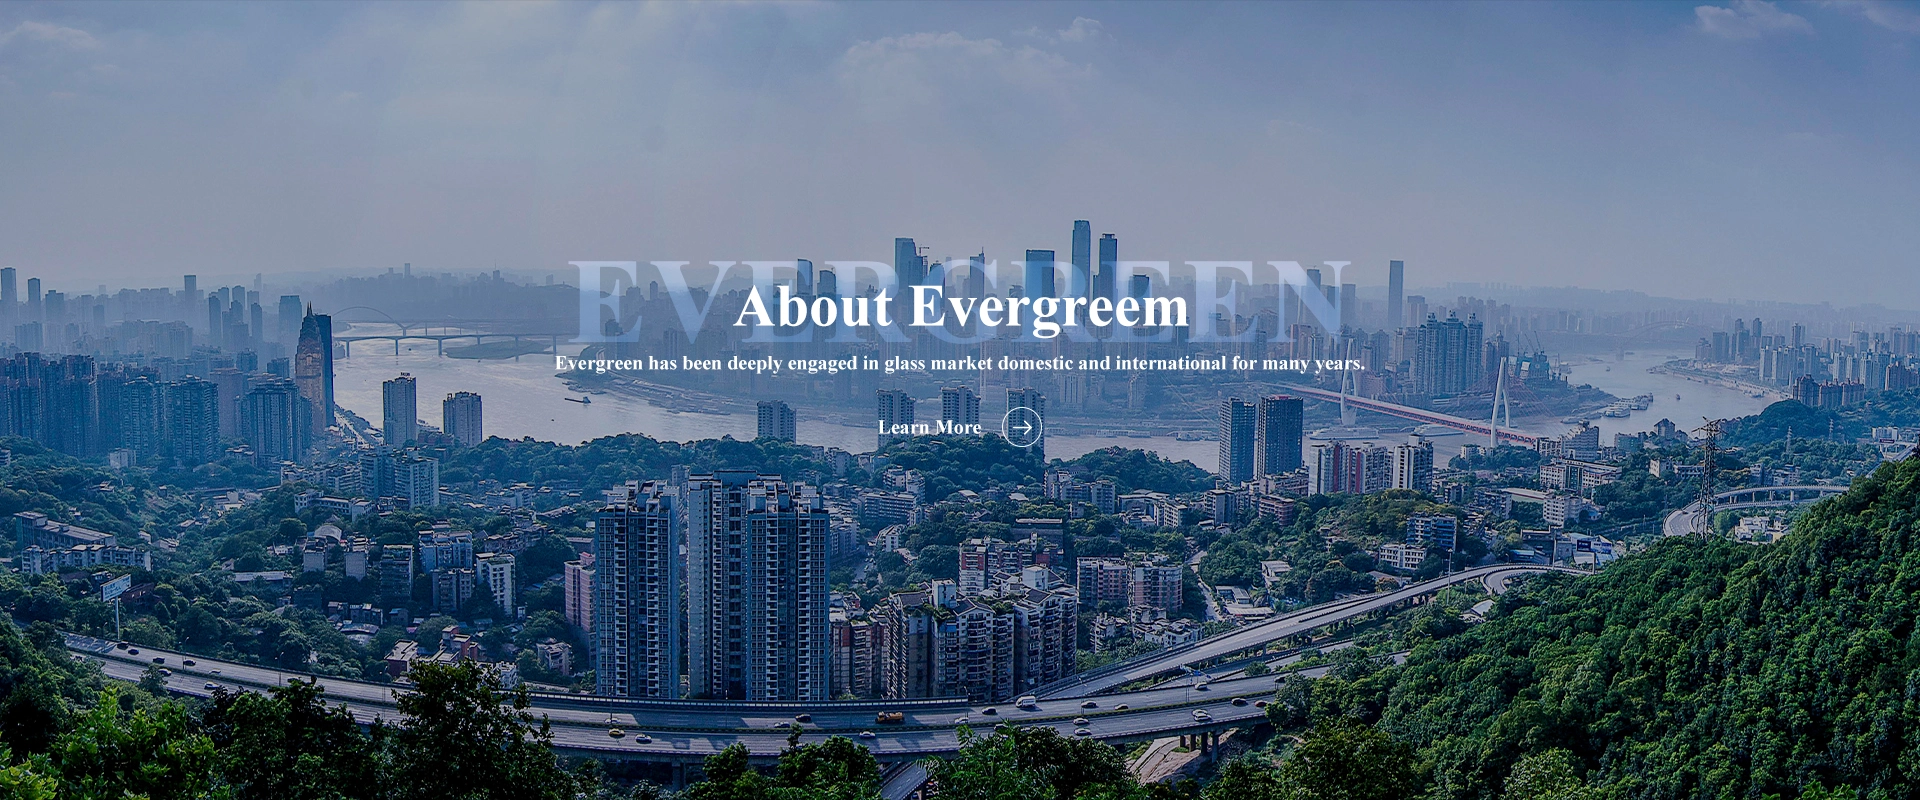 About Evergreen